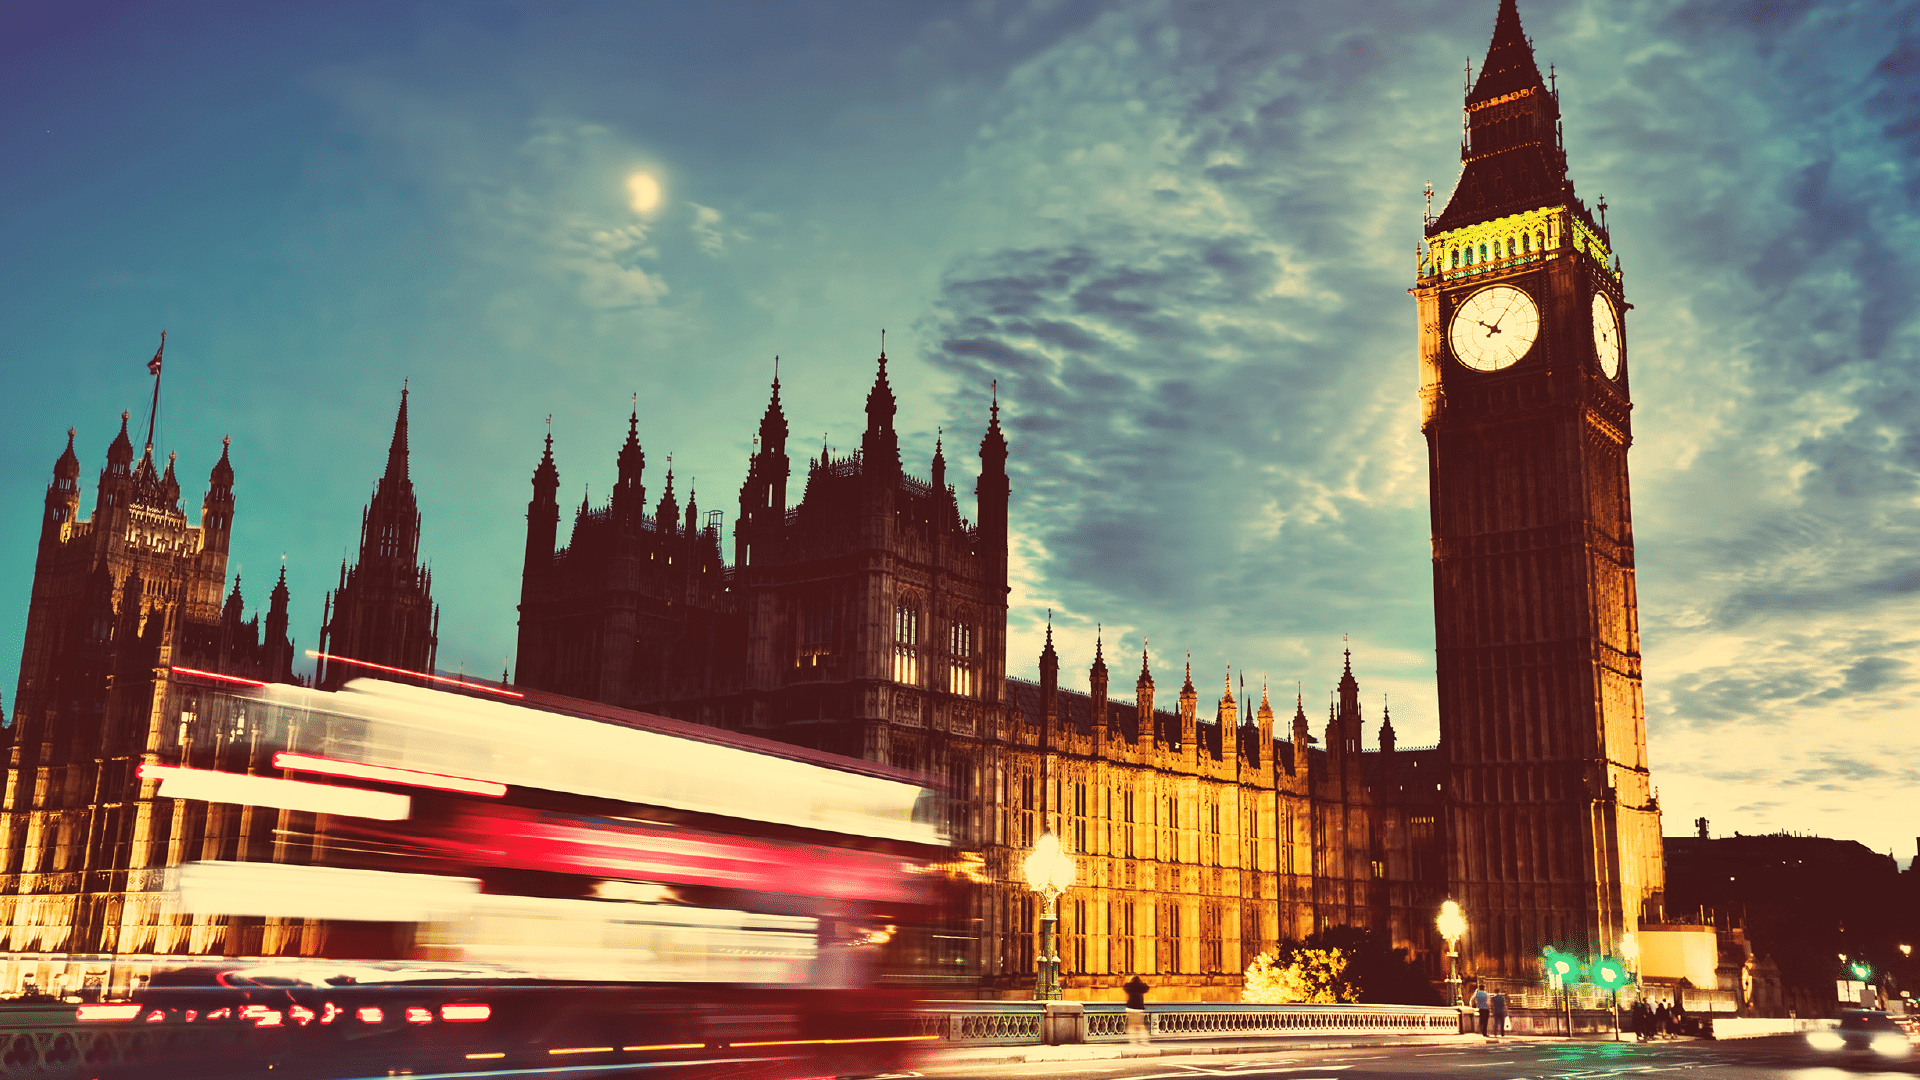 Westminster palace and big ben in the late evening